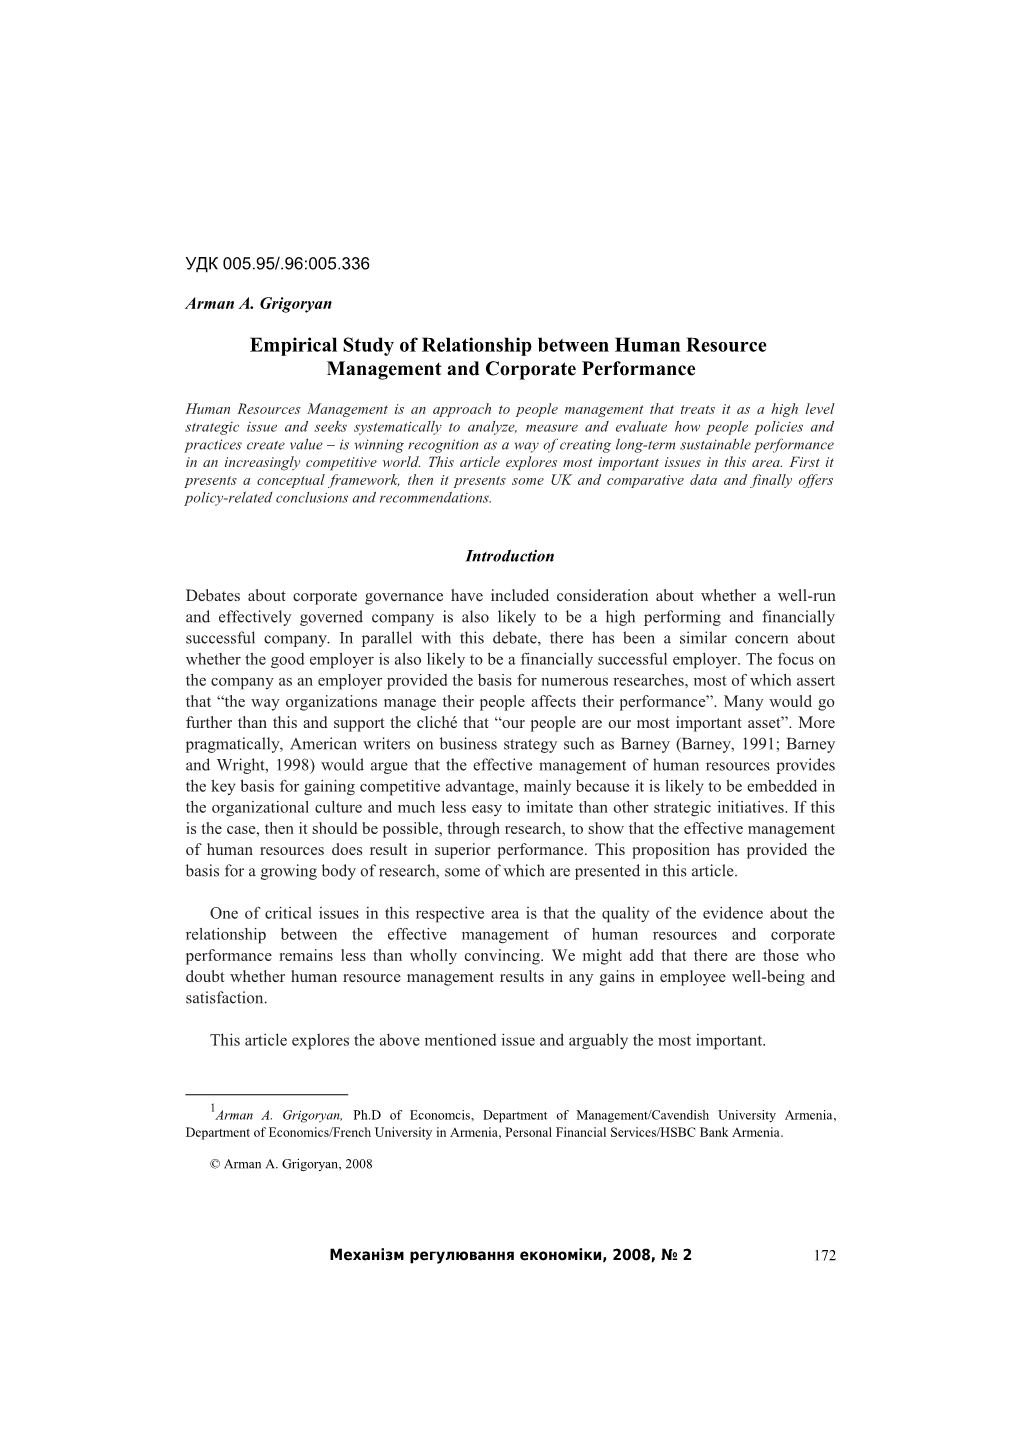 Empirical Study of Human Resource Management and Corporate Performance